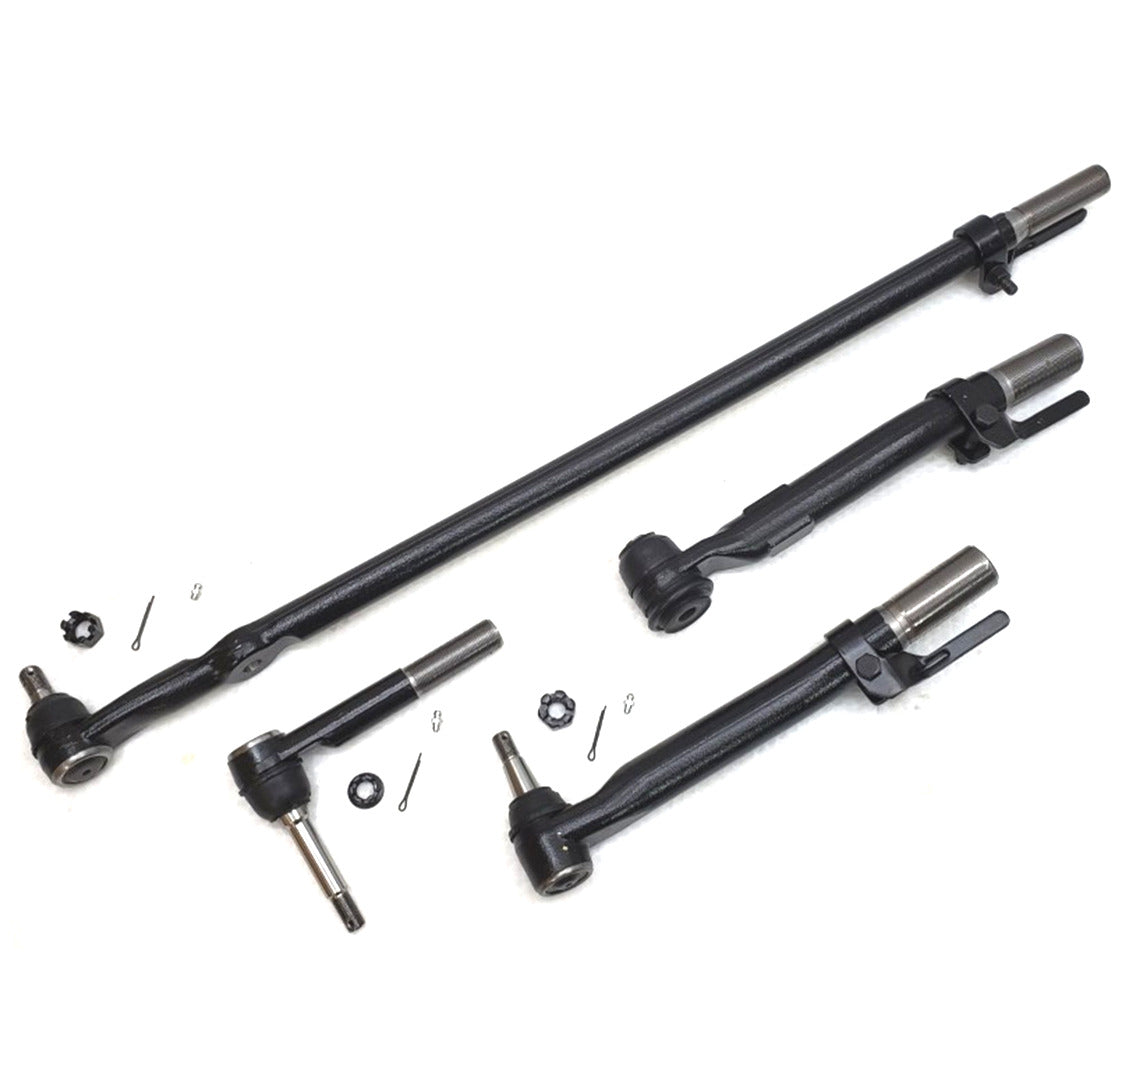 XRF Drag Link Tie Rod Steering Kit for 2011-2016 Ford F450, F550 Super Duty 4x4